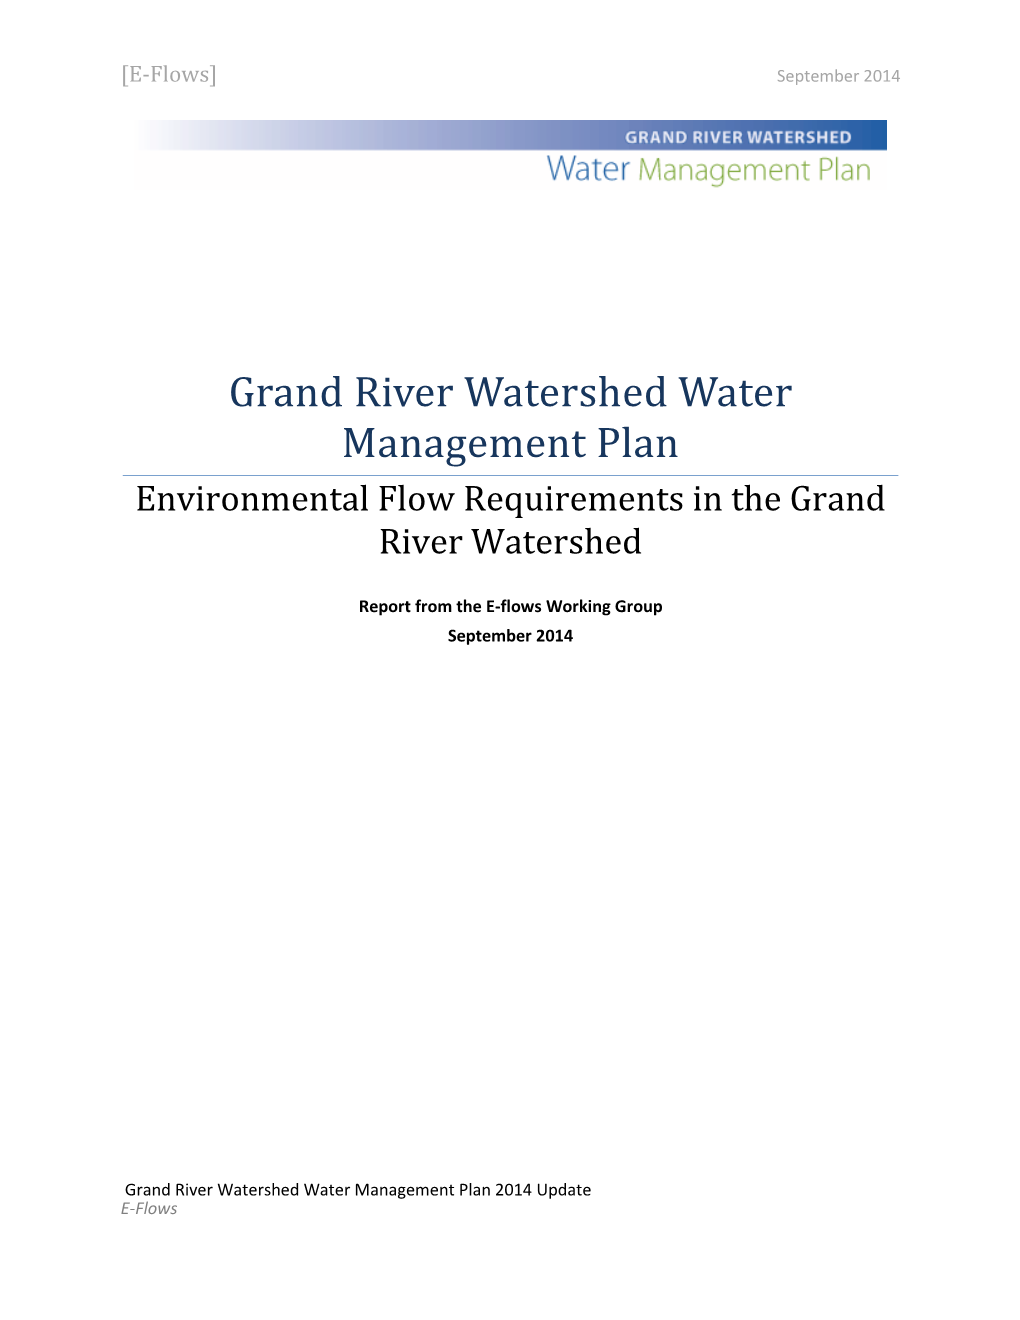 Grand River Watershed Water Management Plan Environmental Flow Requirements in the Grand River Watershed